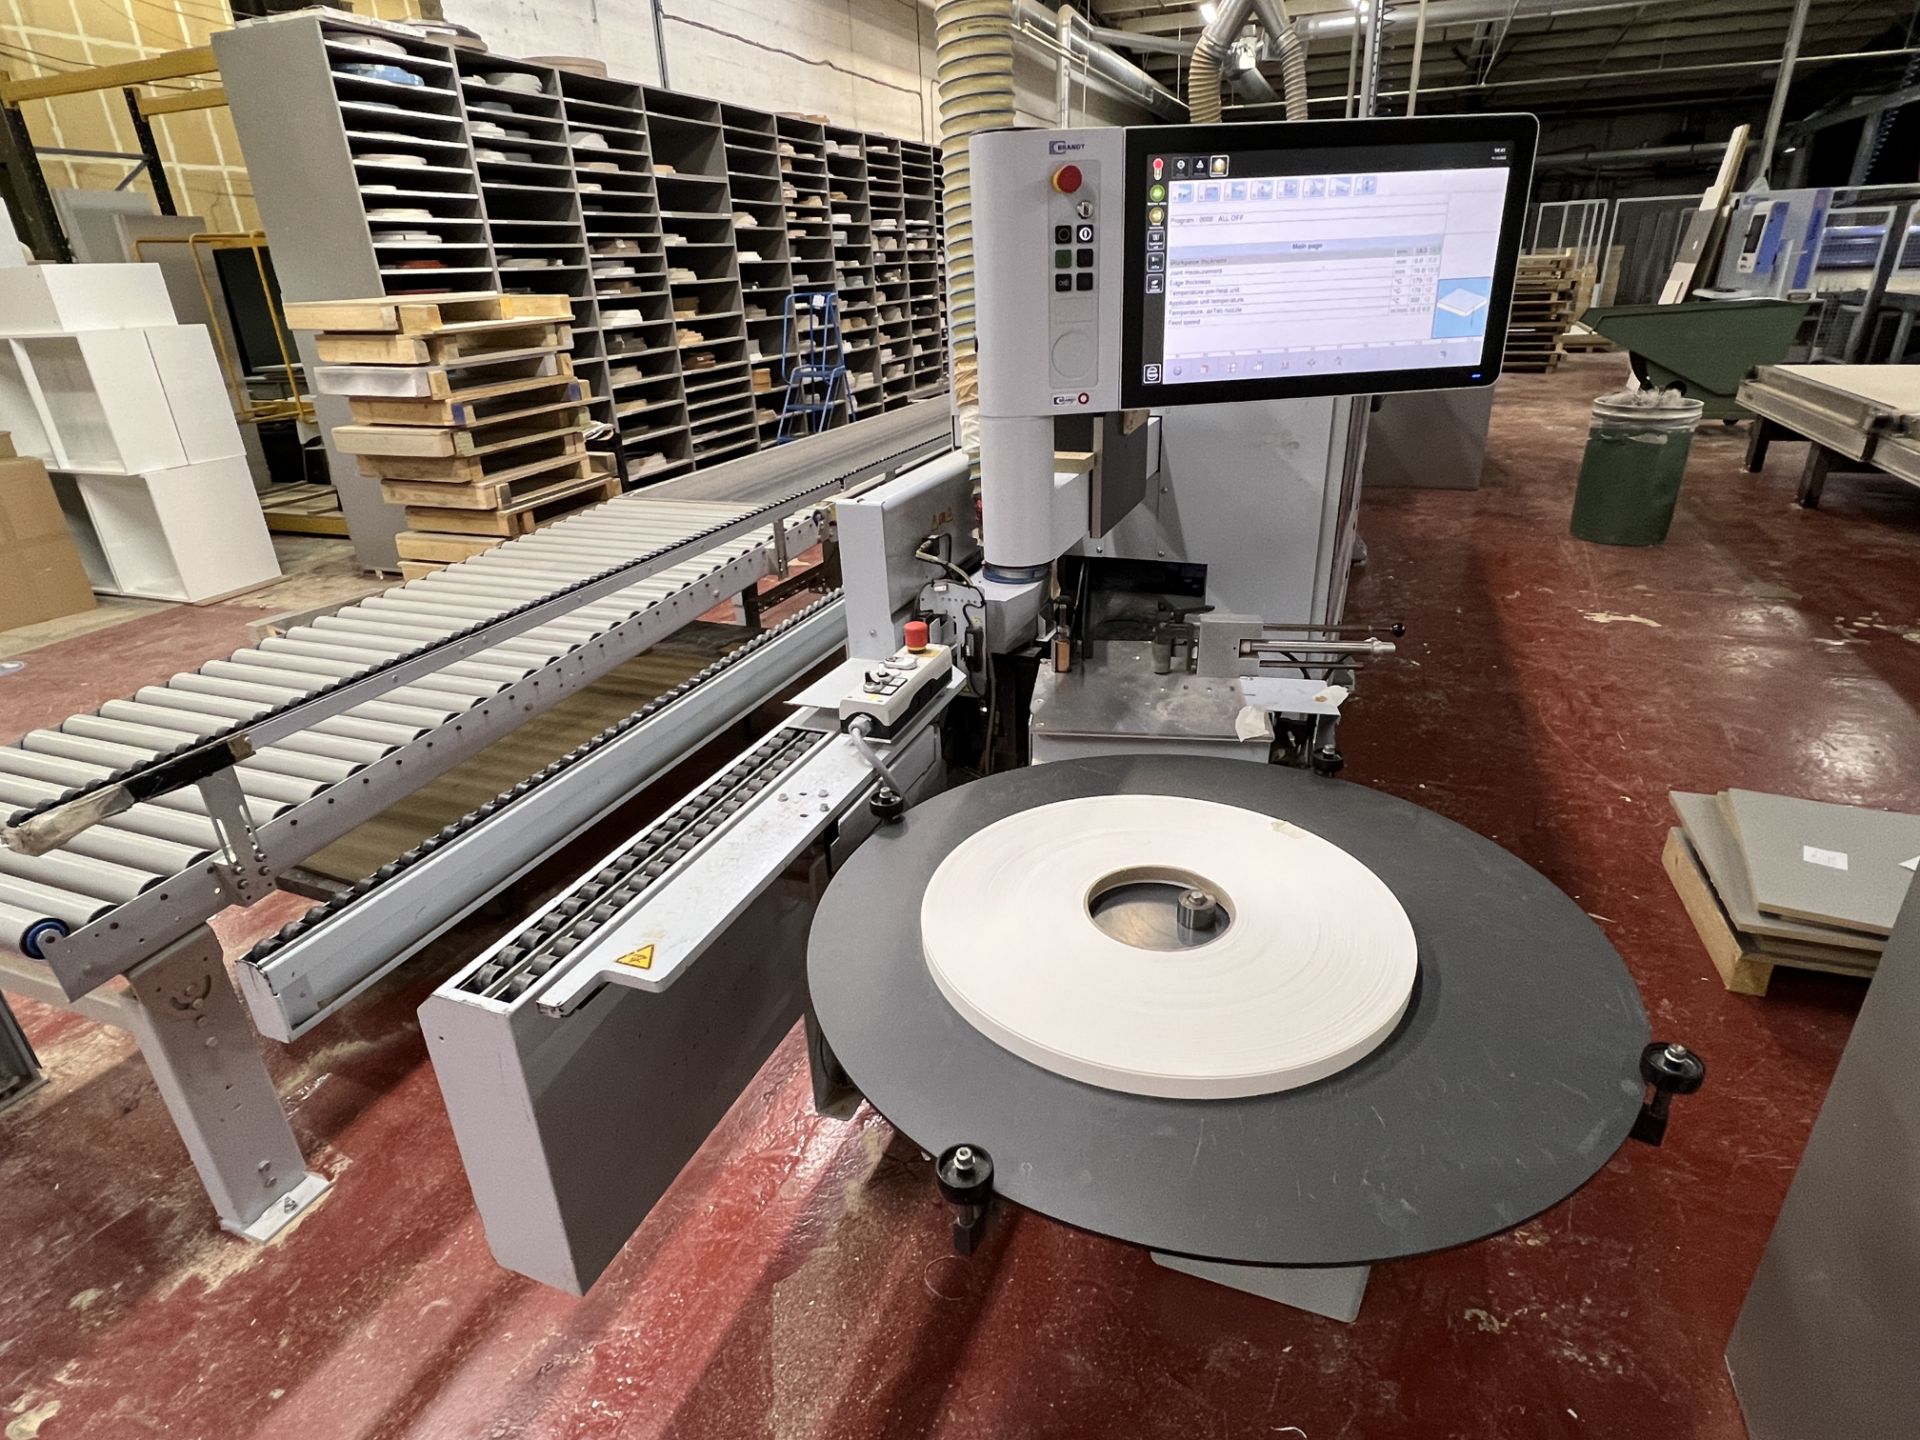 Brandt Highflex 1650 KDF 650 single sided edgebander, edge material thickness up to 15mm, - Image 28 of 32